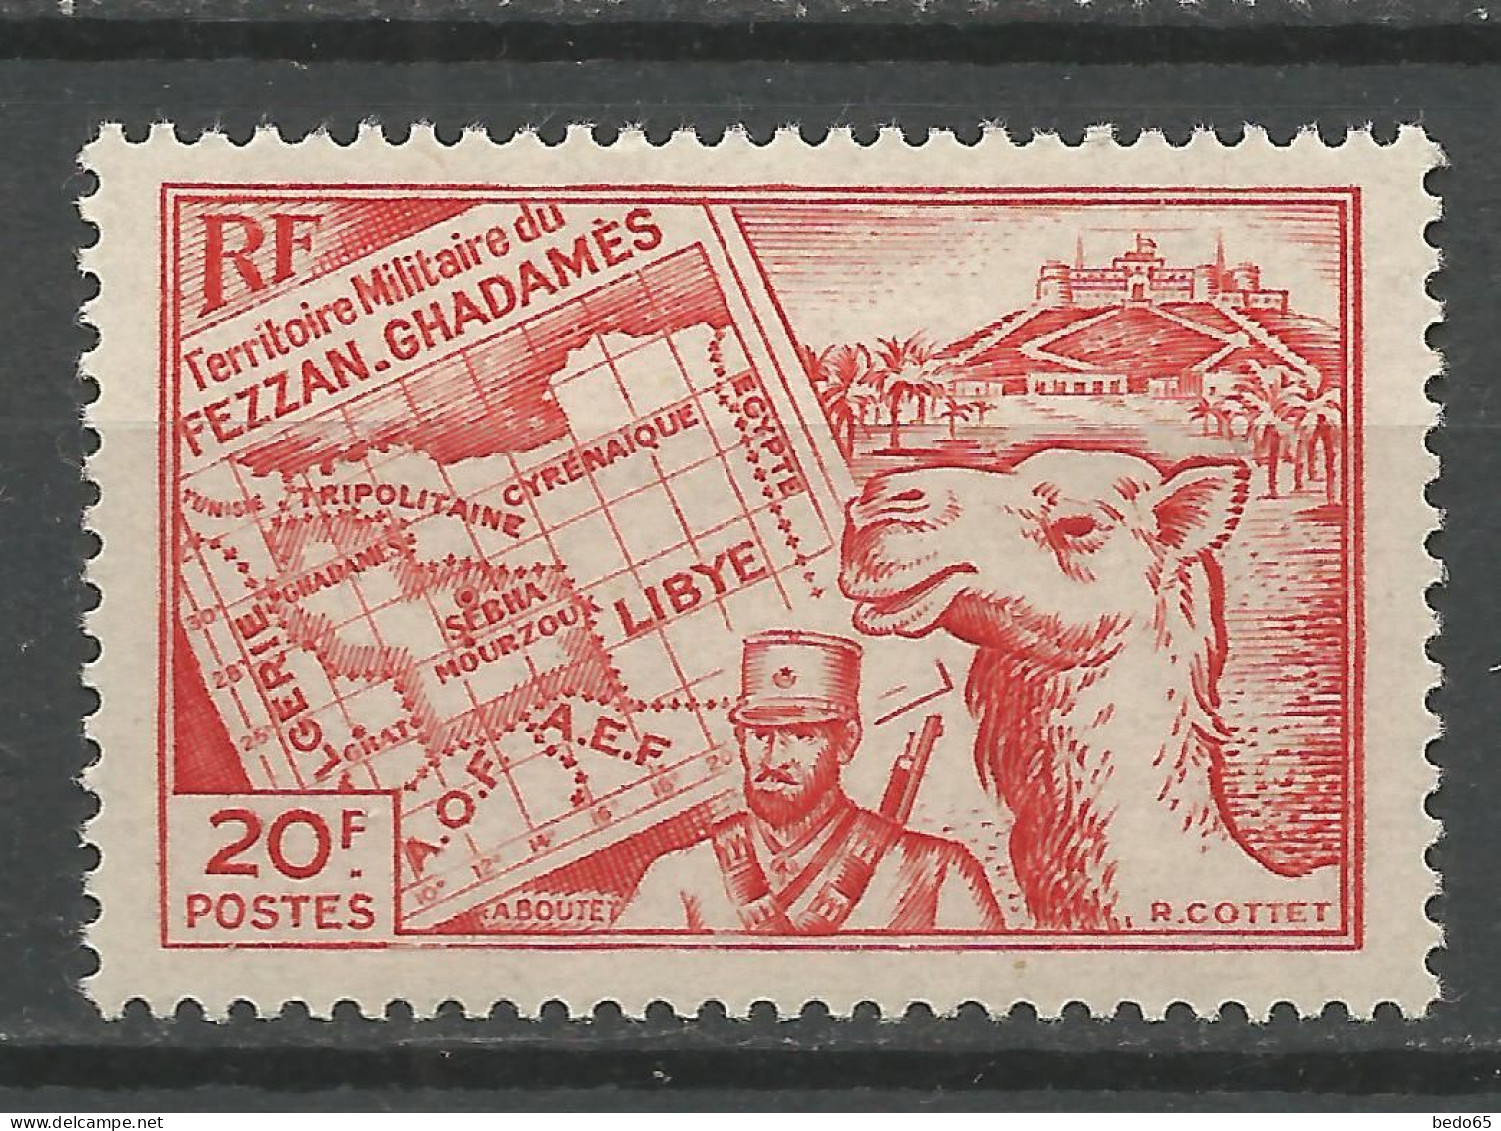 FEZZAN N° 39 NEUF** LUXE SANS CHARNIERE NI TRACE Très Bon Centrage / Hingeless  / MNH - Unused Stamps